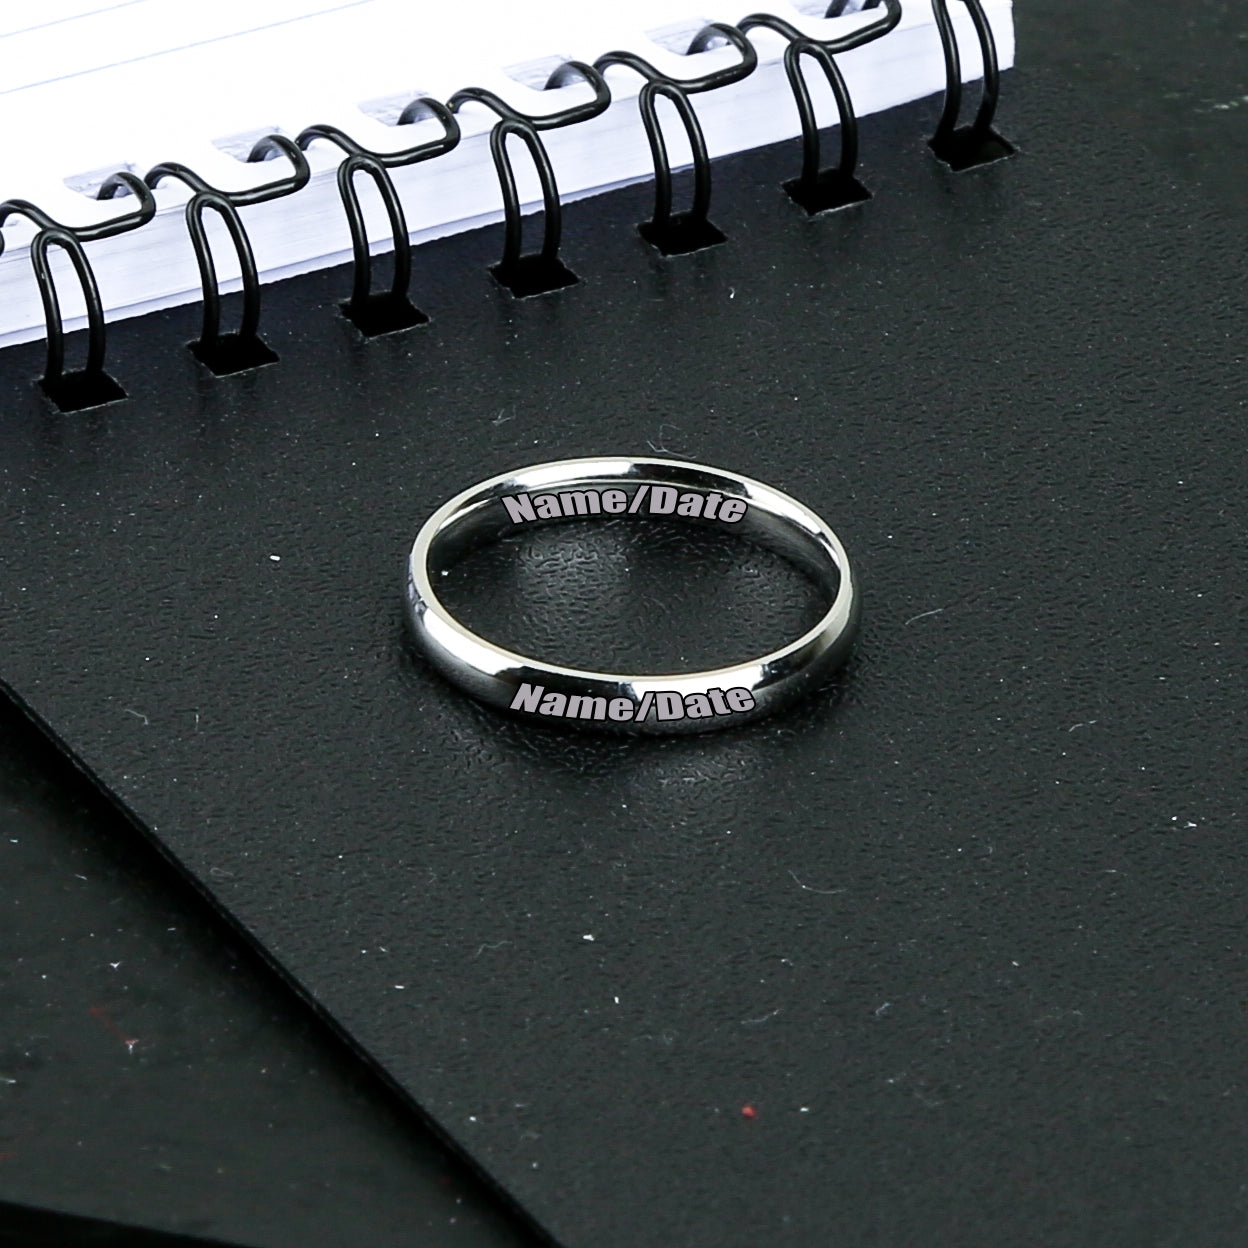 Customised Name Carved Ring